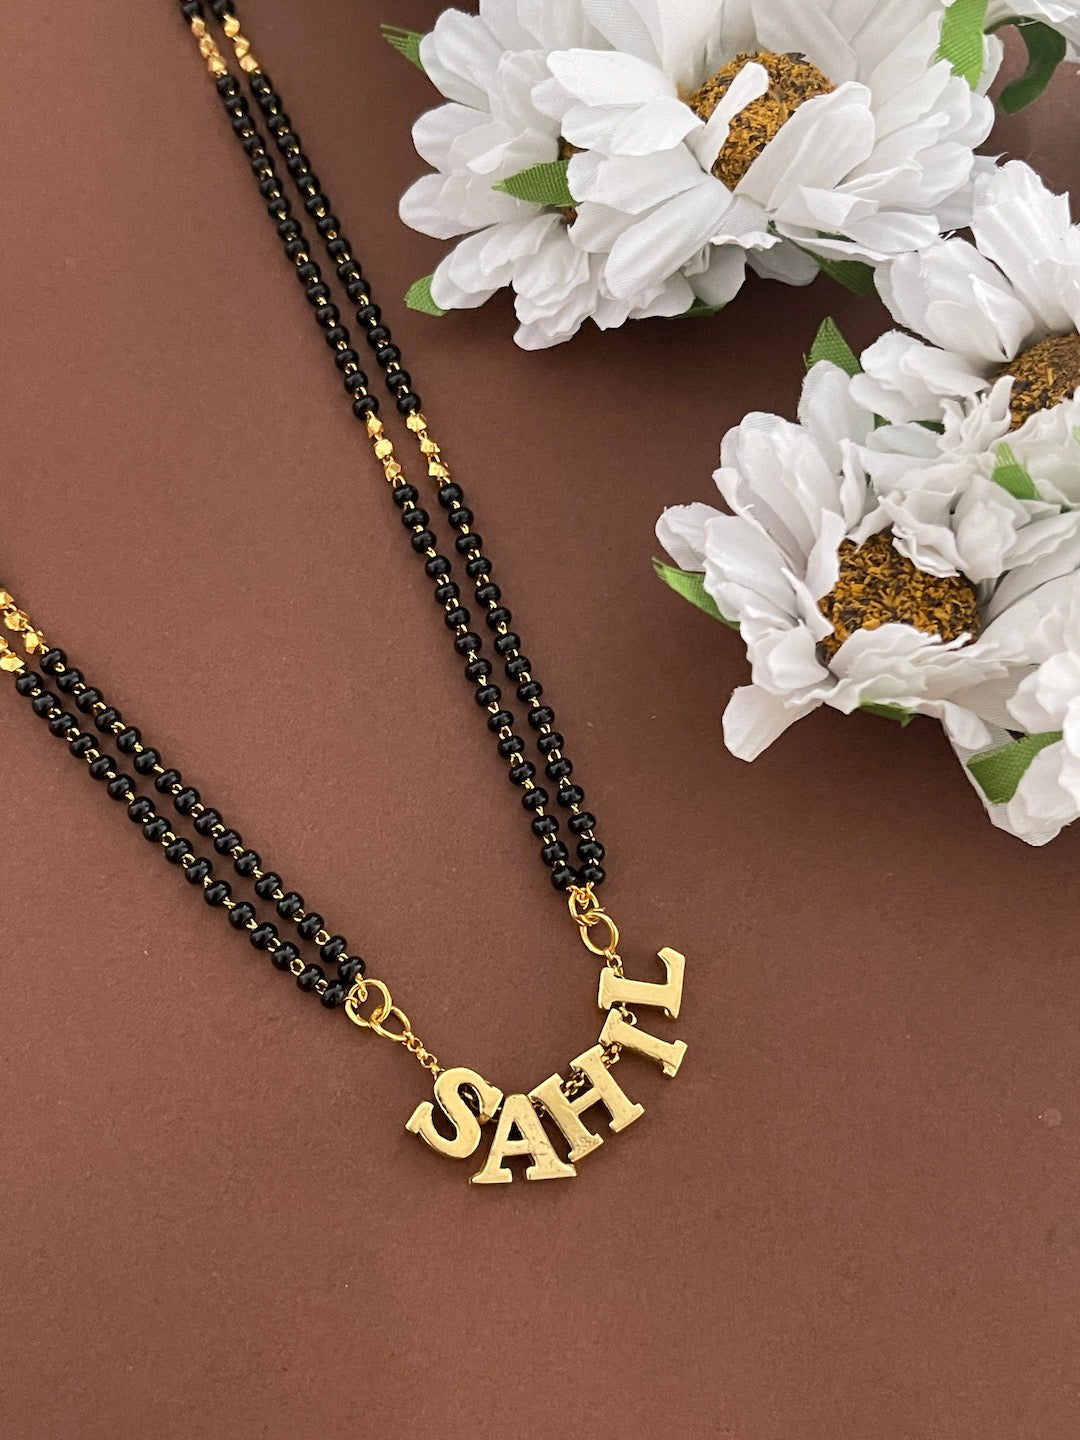 Fancy Name Mangalsutra With 2 Line Black Beads Chain | Short Mangalsutra